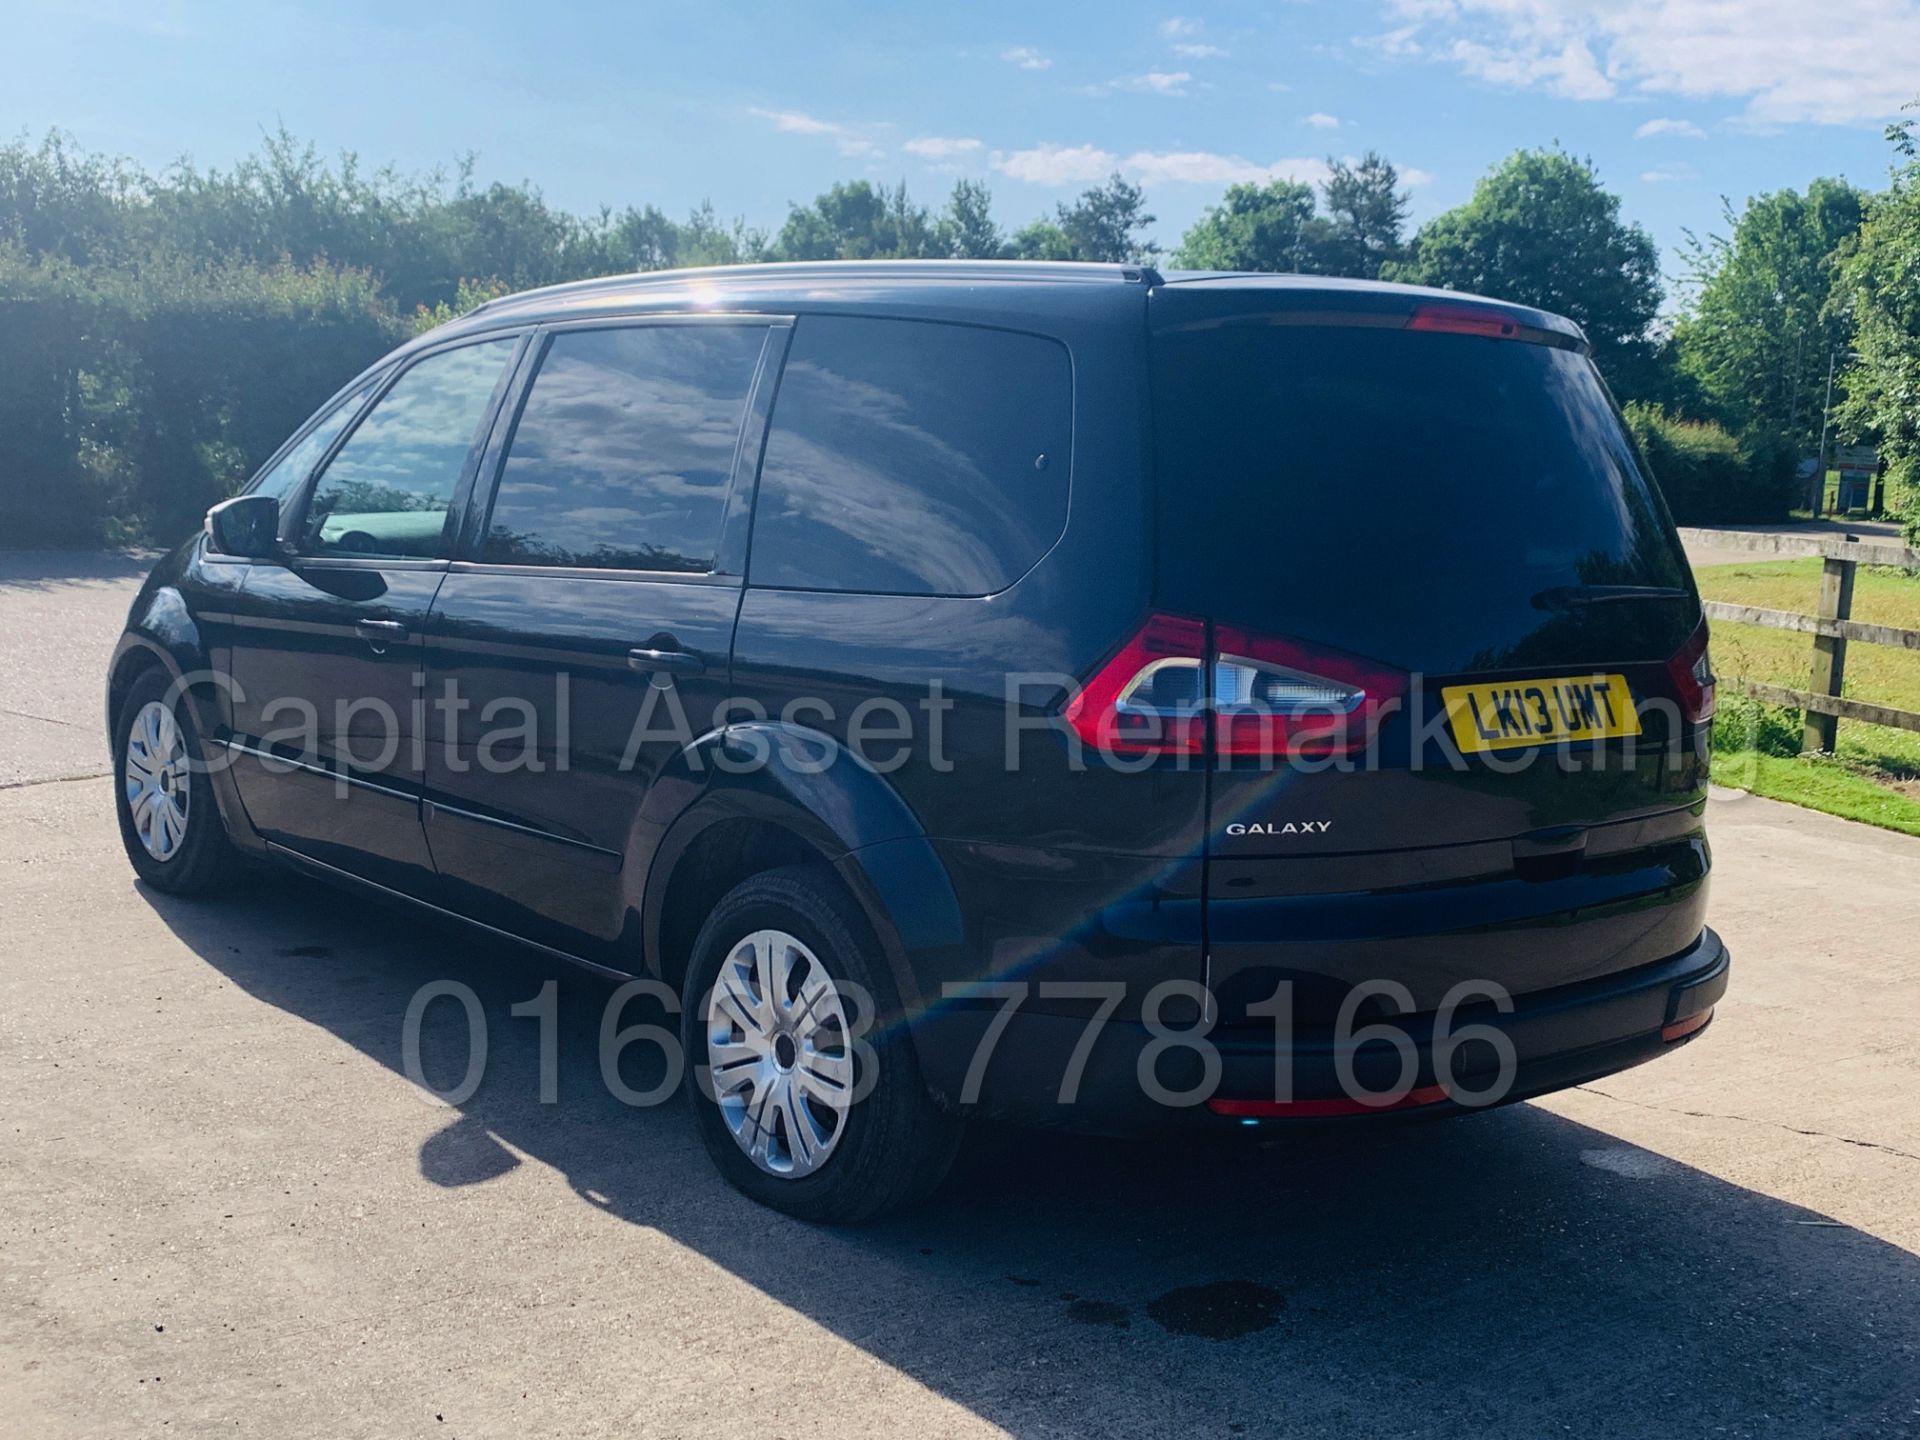 (ON SALE) FORD GALAXY *ZETEC* 7 SEATER MPV (2013) '2.0 TDCI - POWER SHIFT' (NO VAT - SAVE 20%) - Image 4 of 31